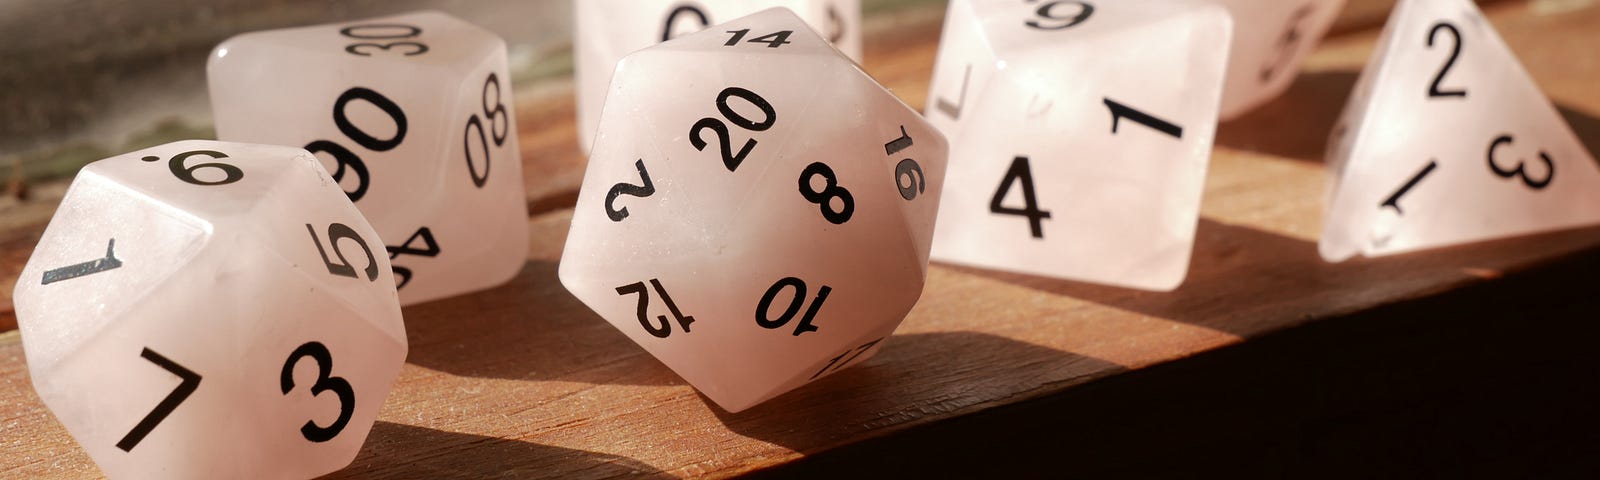 On a wooden window sill, there is a variety of white dice that range from a D4 to a D20. They have white faces with black numbers.